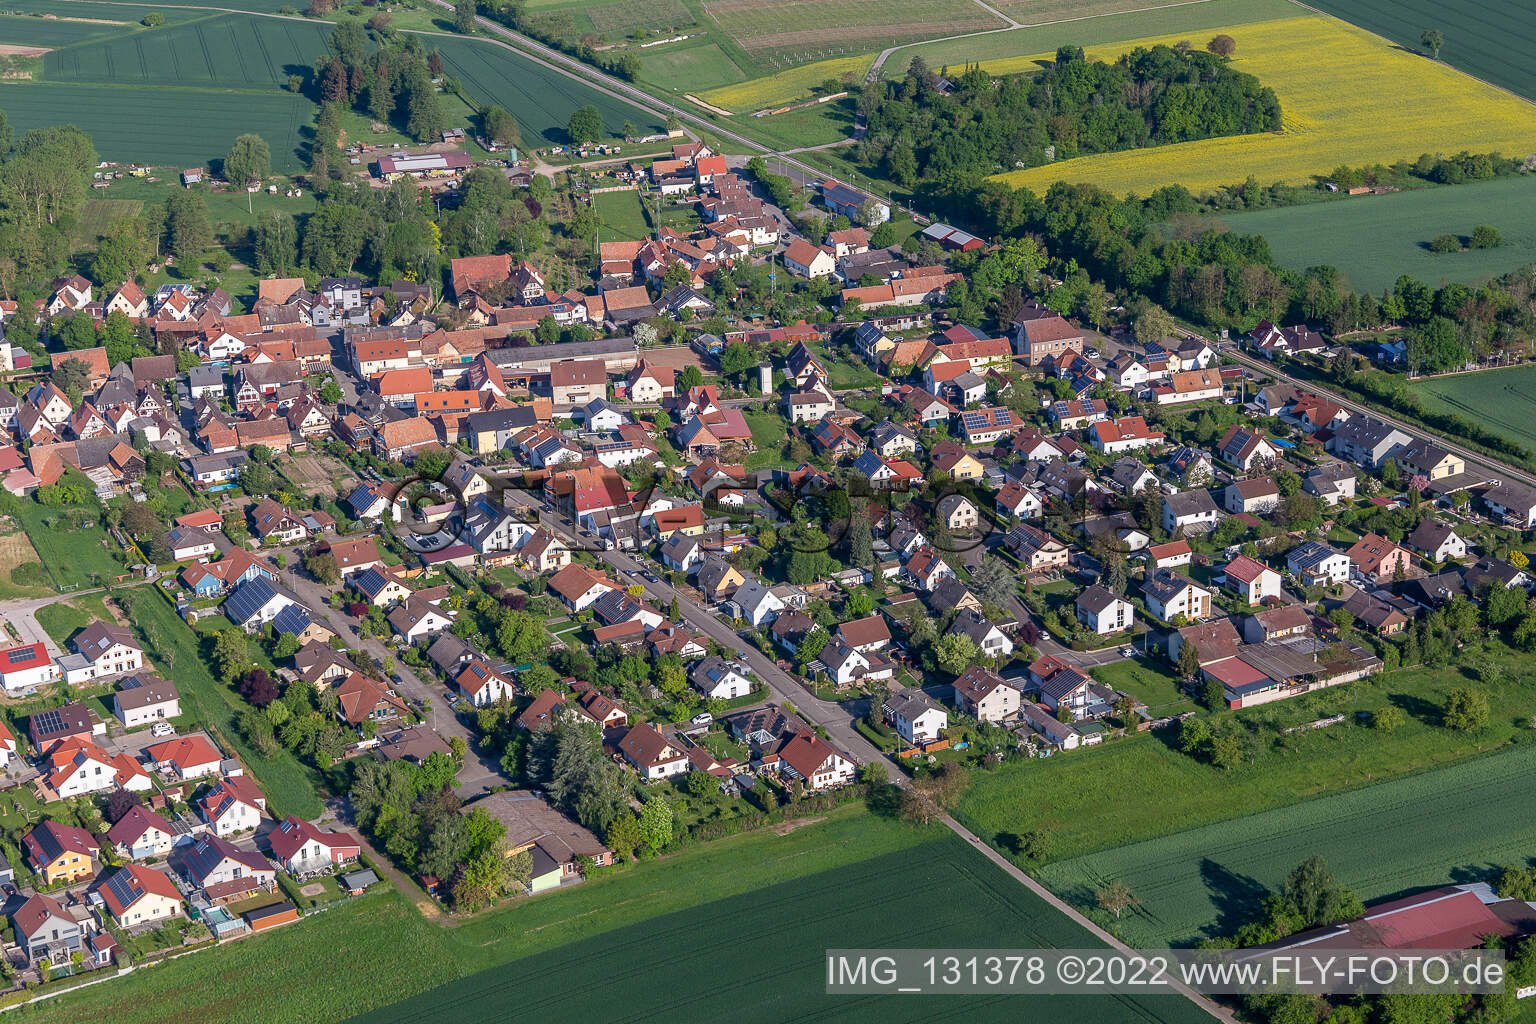 Drone image of Barbelroth in the state Rhineland-Palatinate, Germany